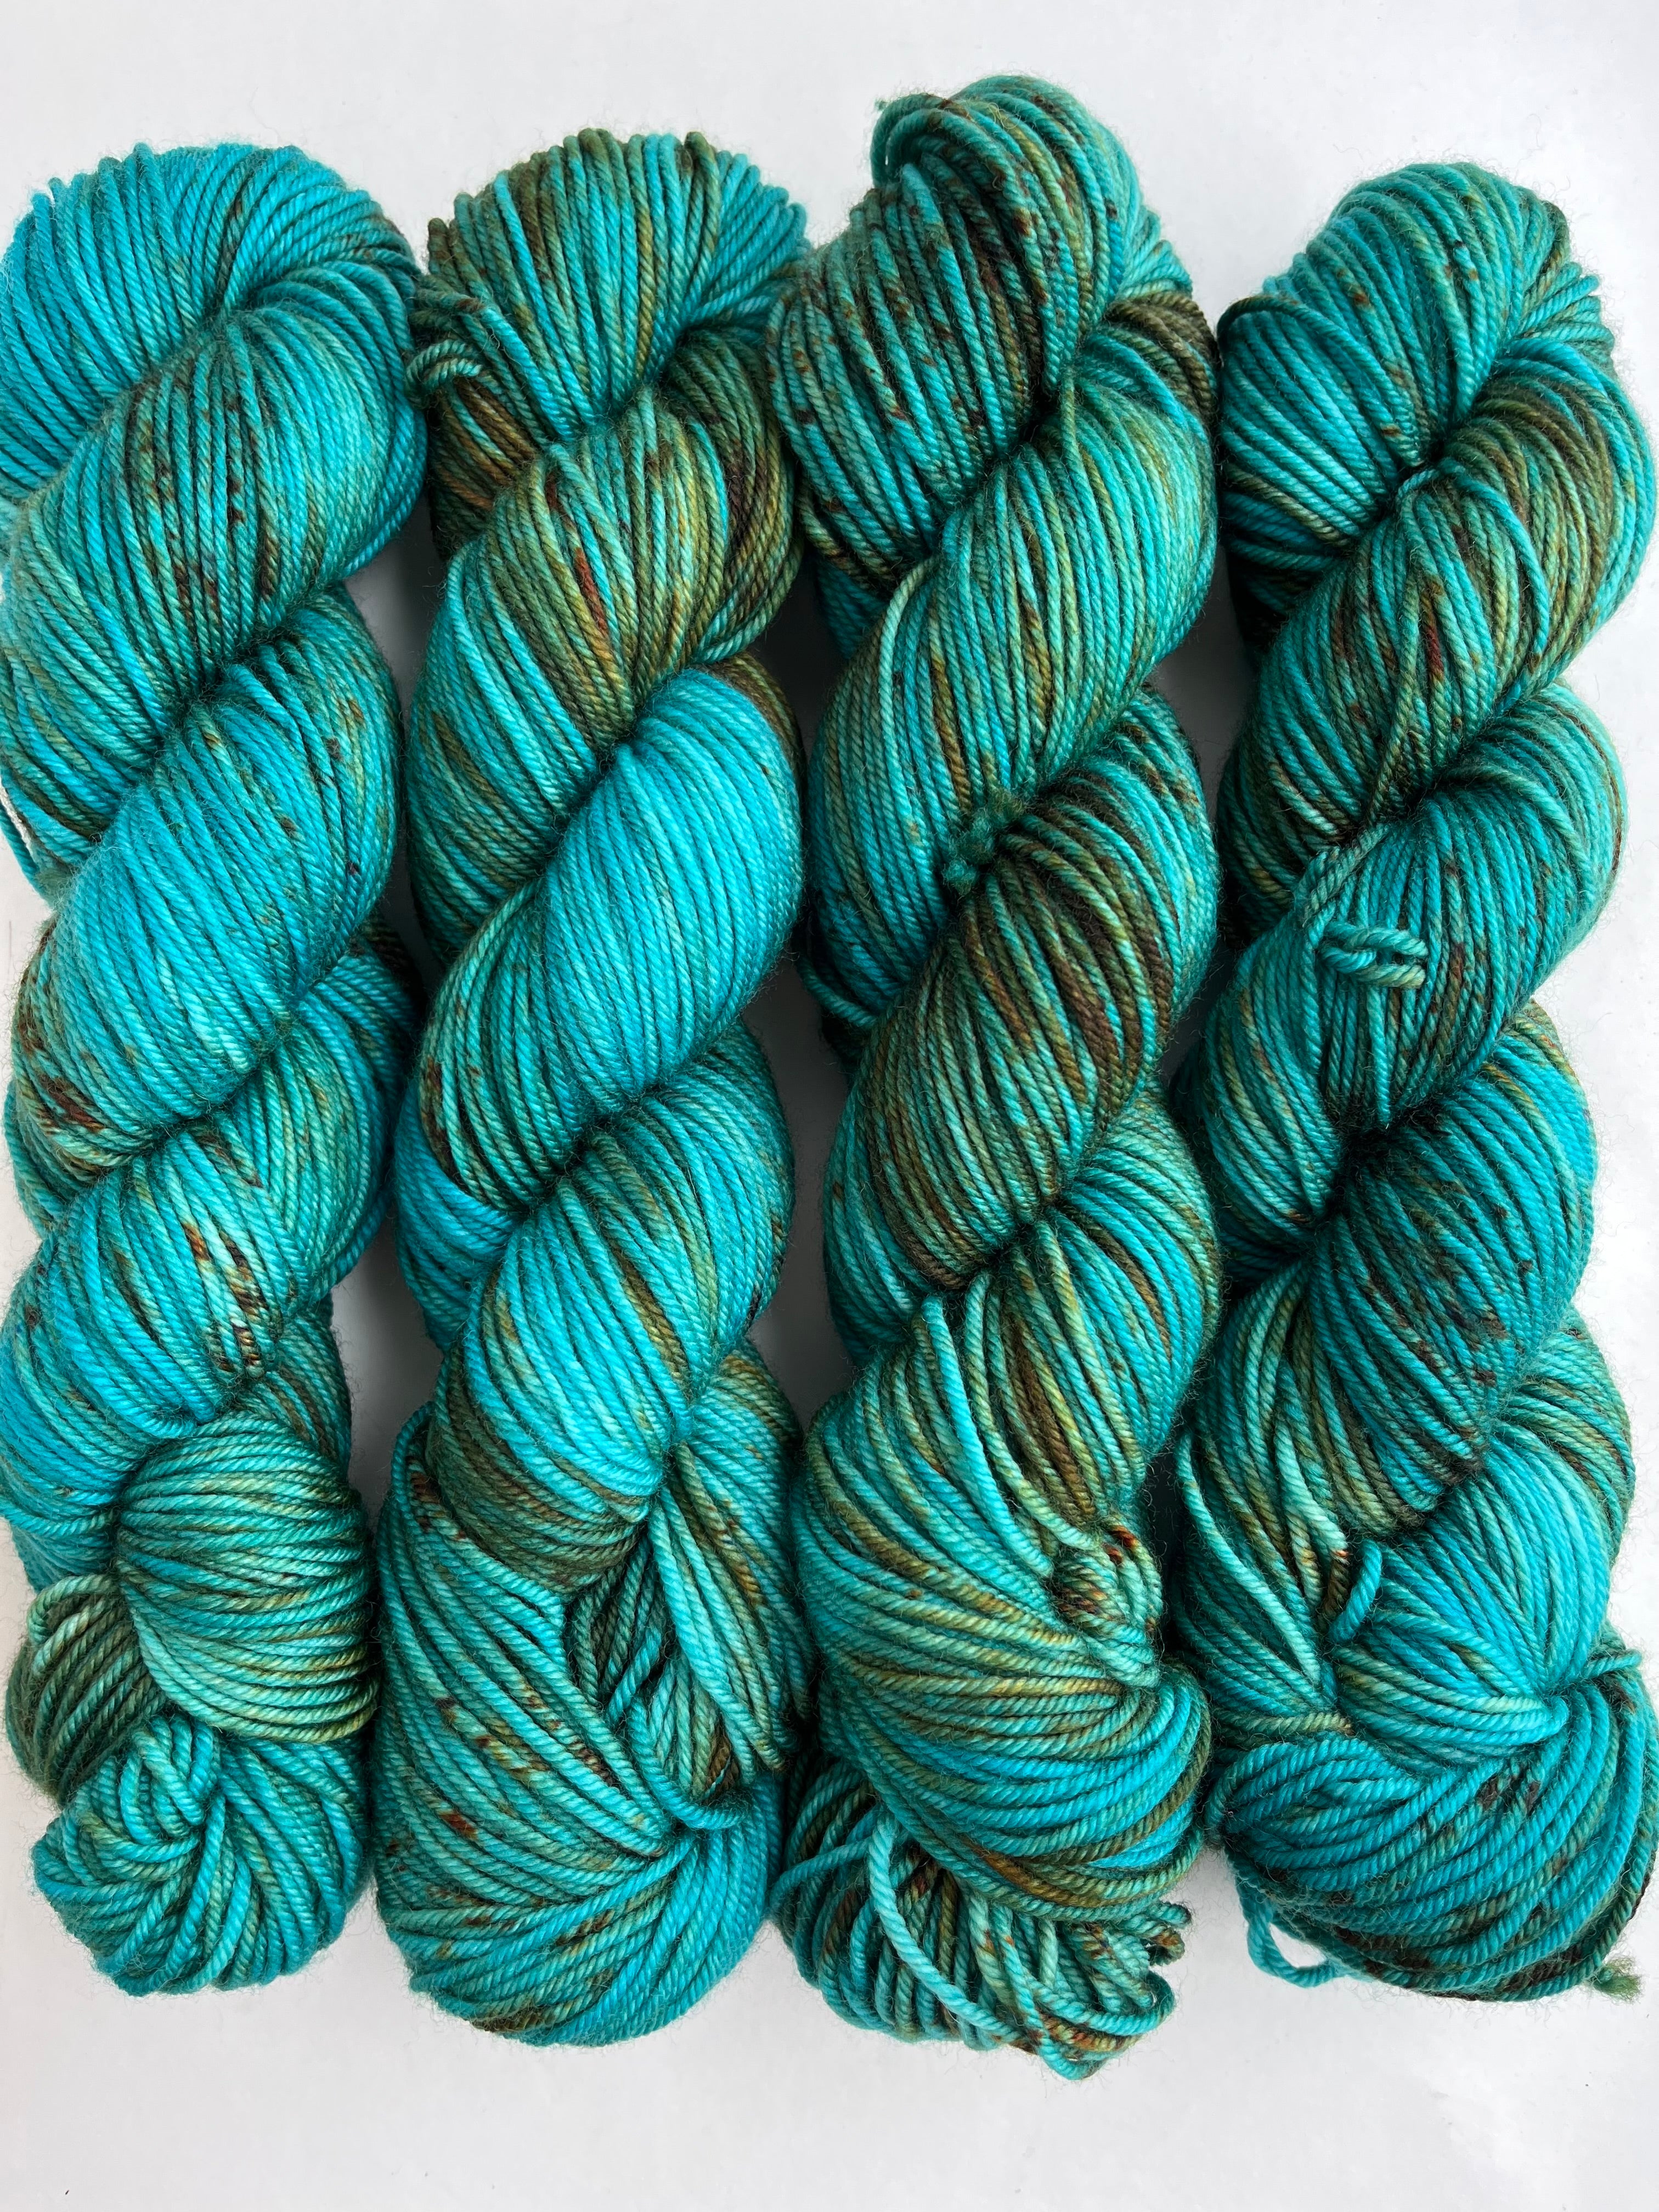 Sunni's Favorite - Tidal DK from Tributary Yarns